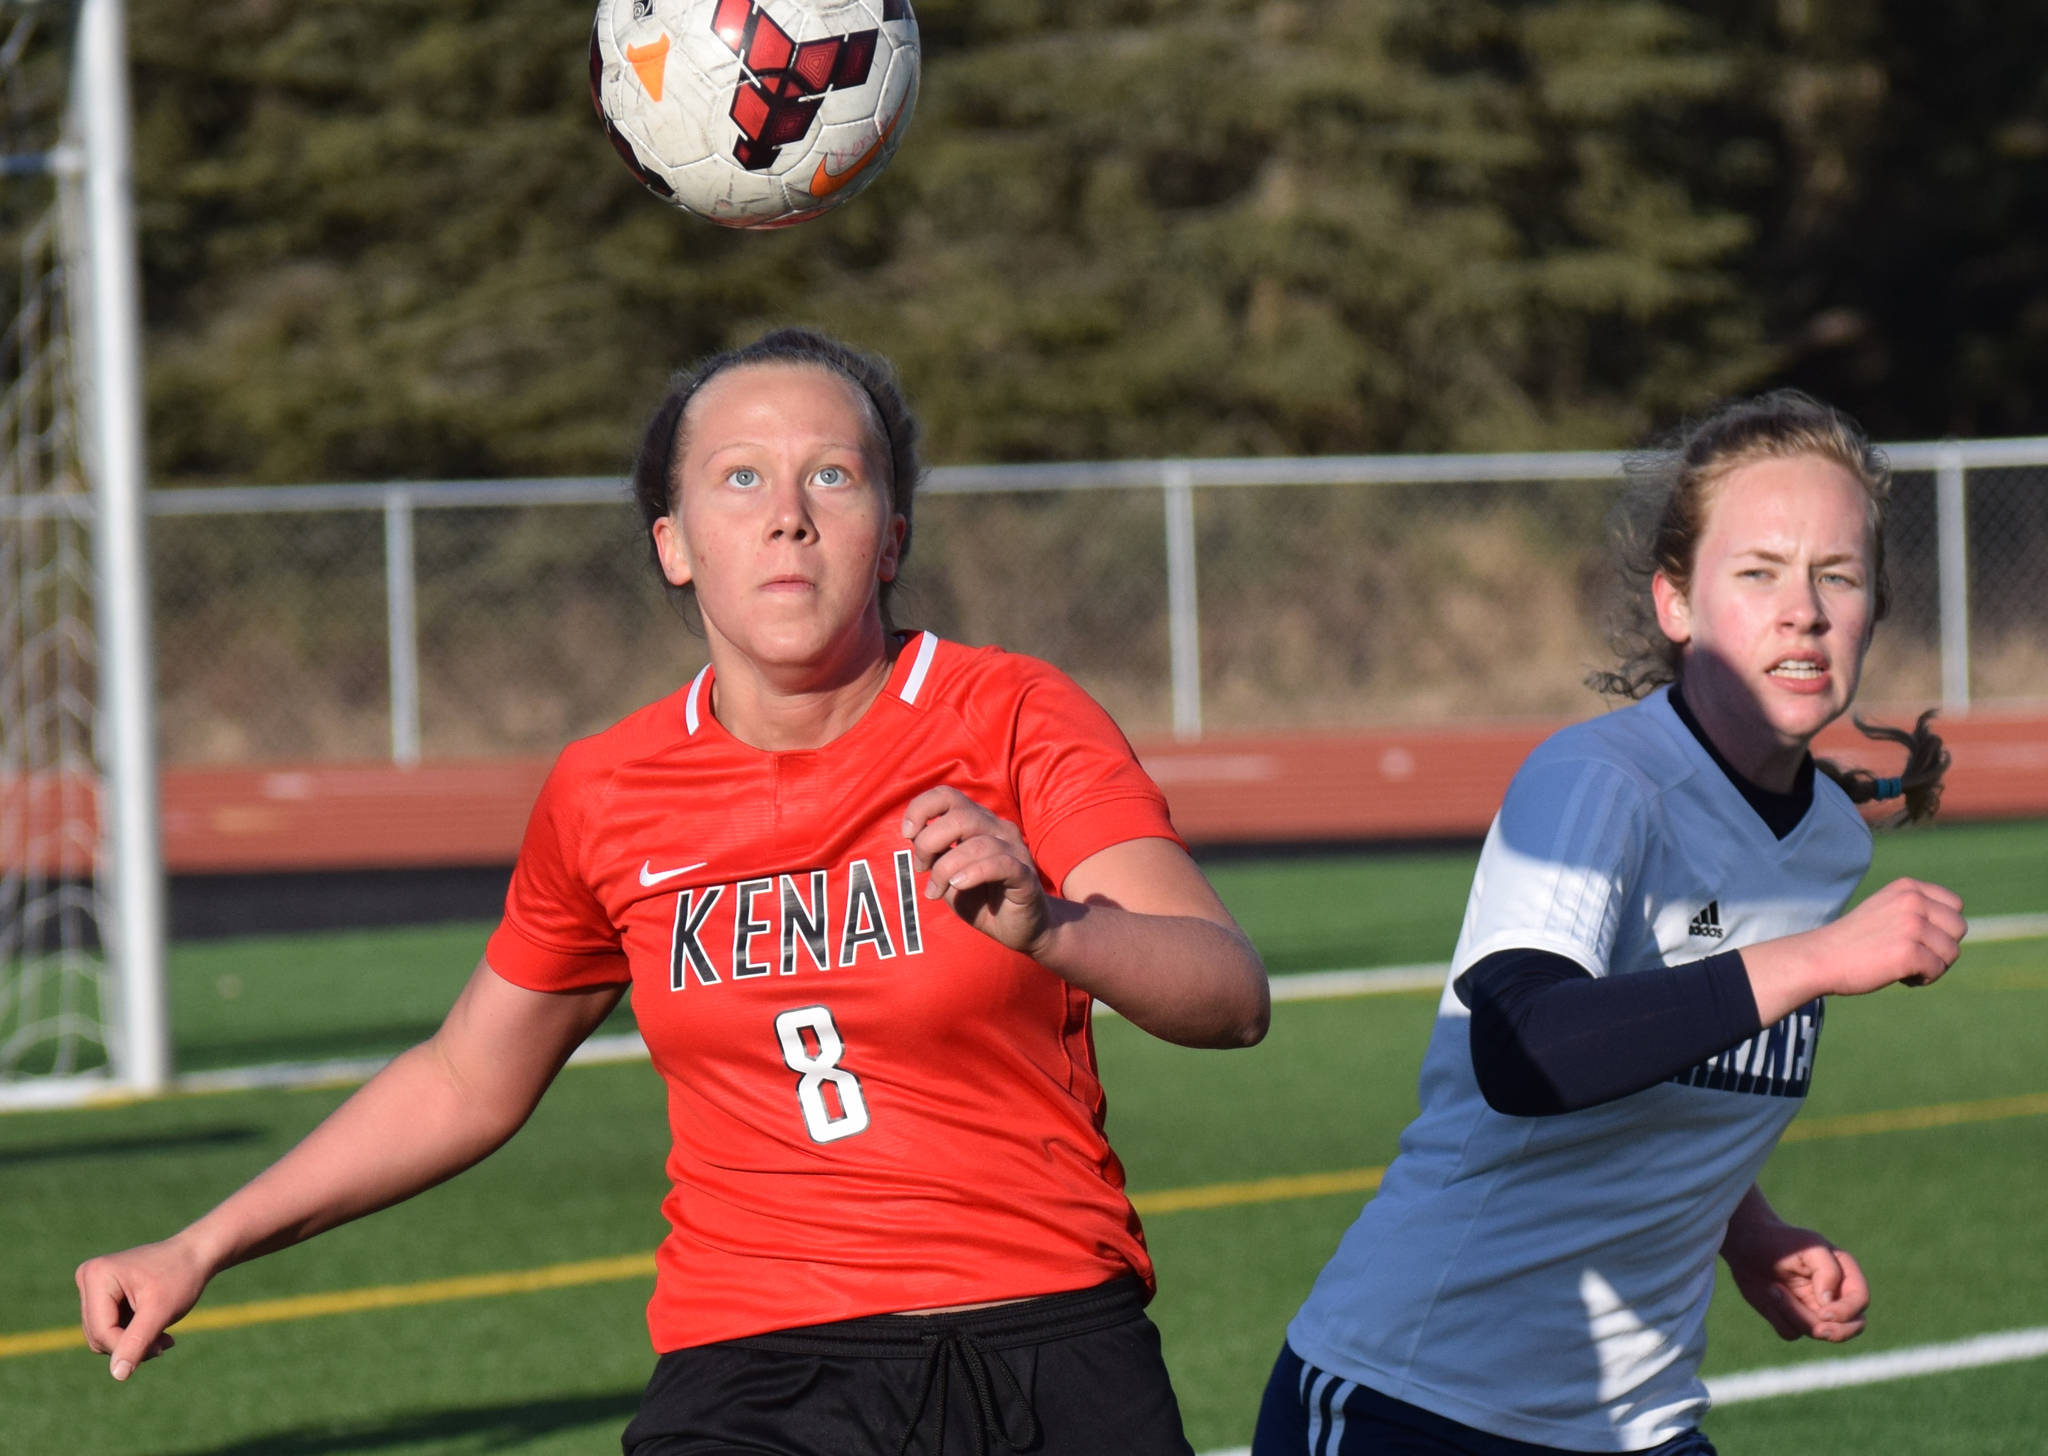 Kenai Central’s Anya Danielson prepares to clear the ball in front of Homer’s Jessica Sonnen on Tuesday, April 16, 2019, at Kenai Central High School in Kenai, Alaska. (Photo by Jeff Helminiak/Peninsula Clarion)